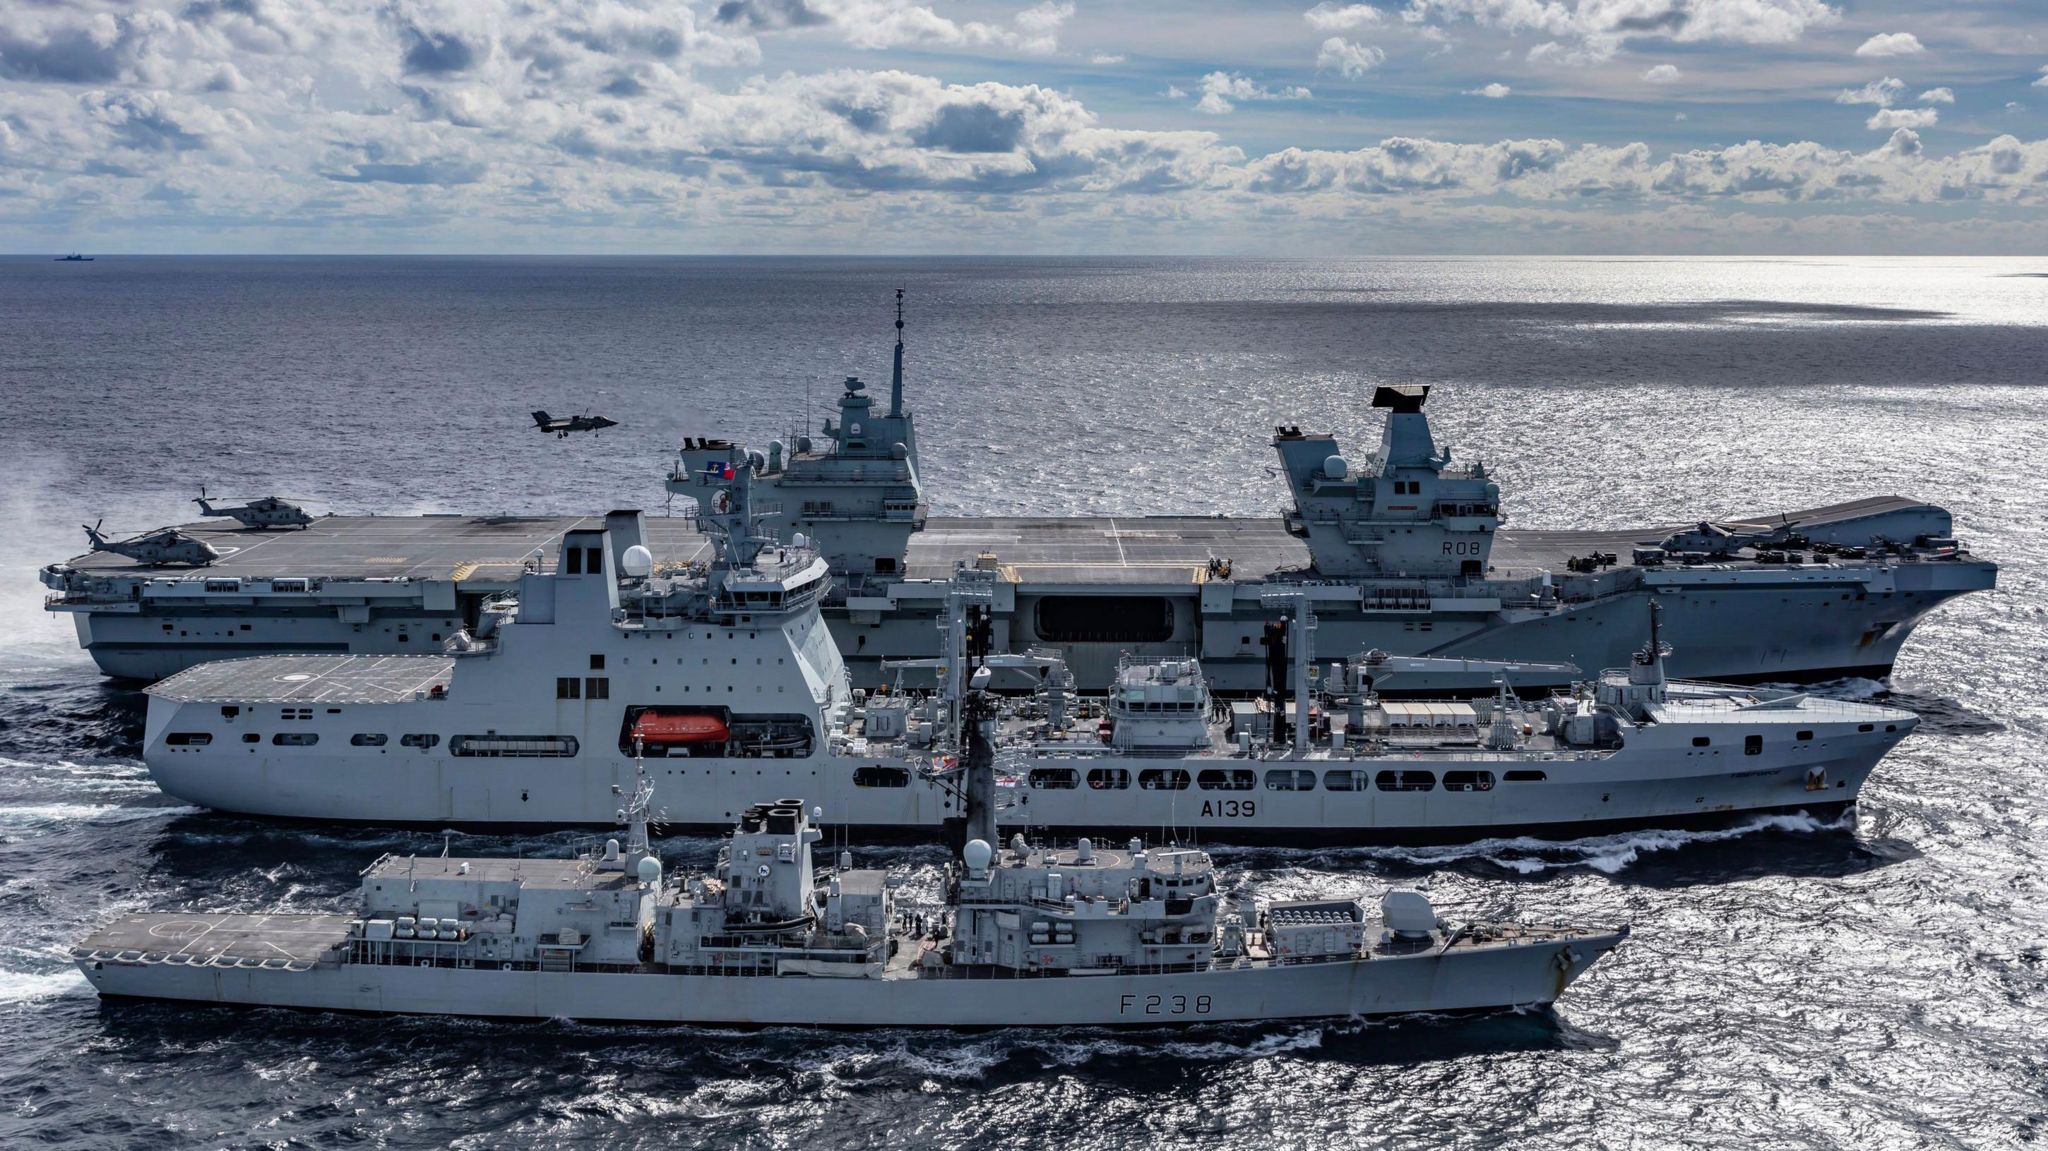 Ships from the Royal Navy and Royal Fleet Auxillary on exercise at sea